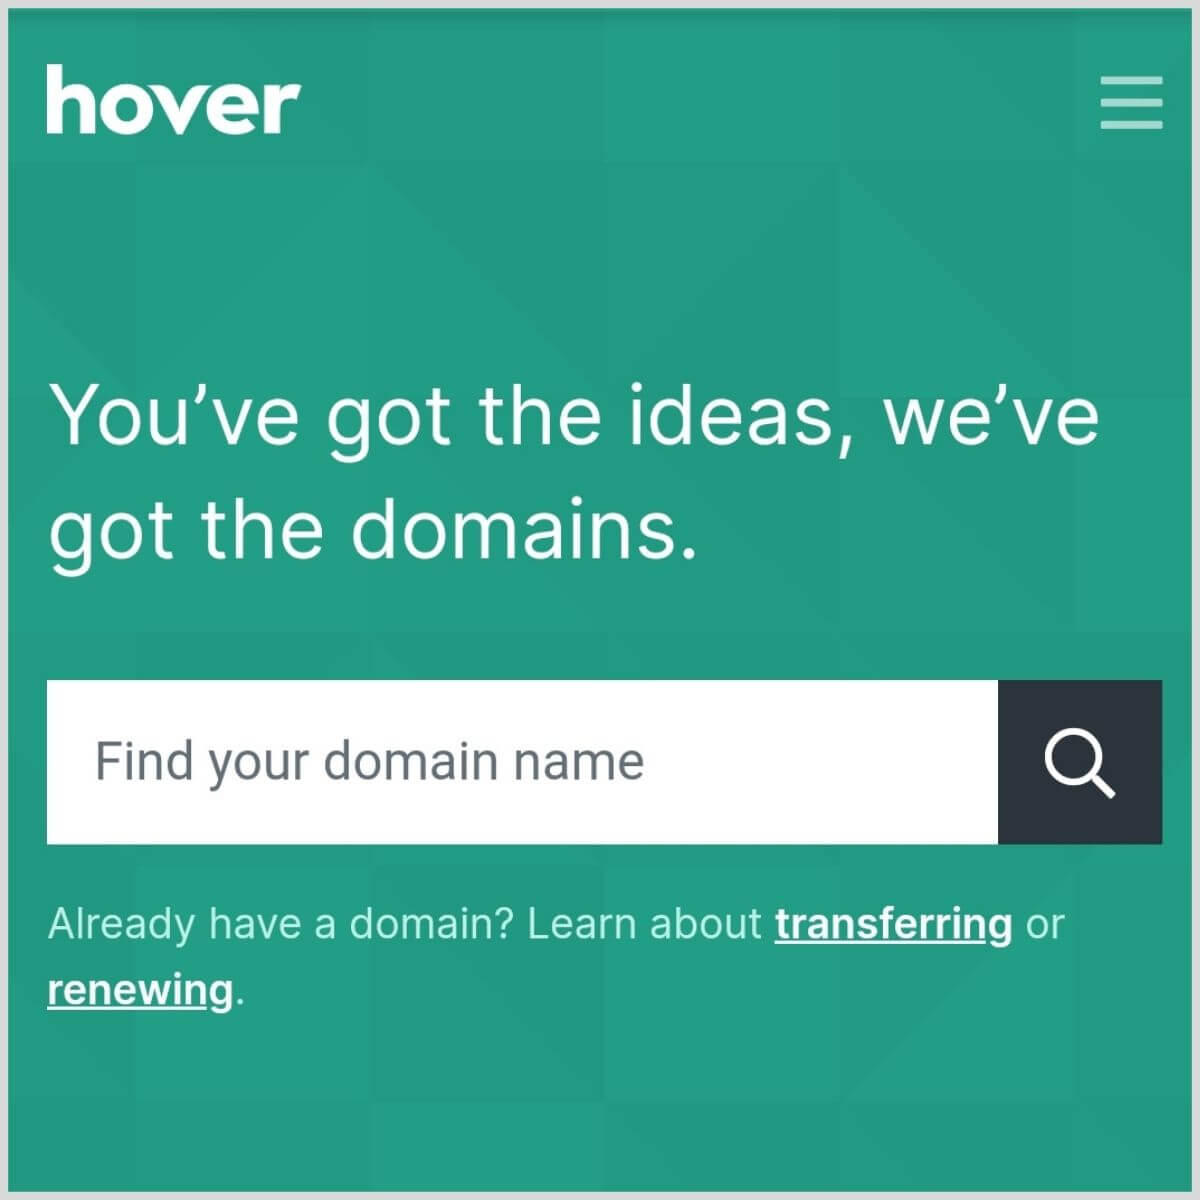 Hover frontpage